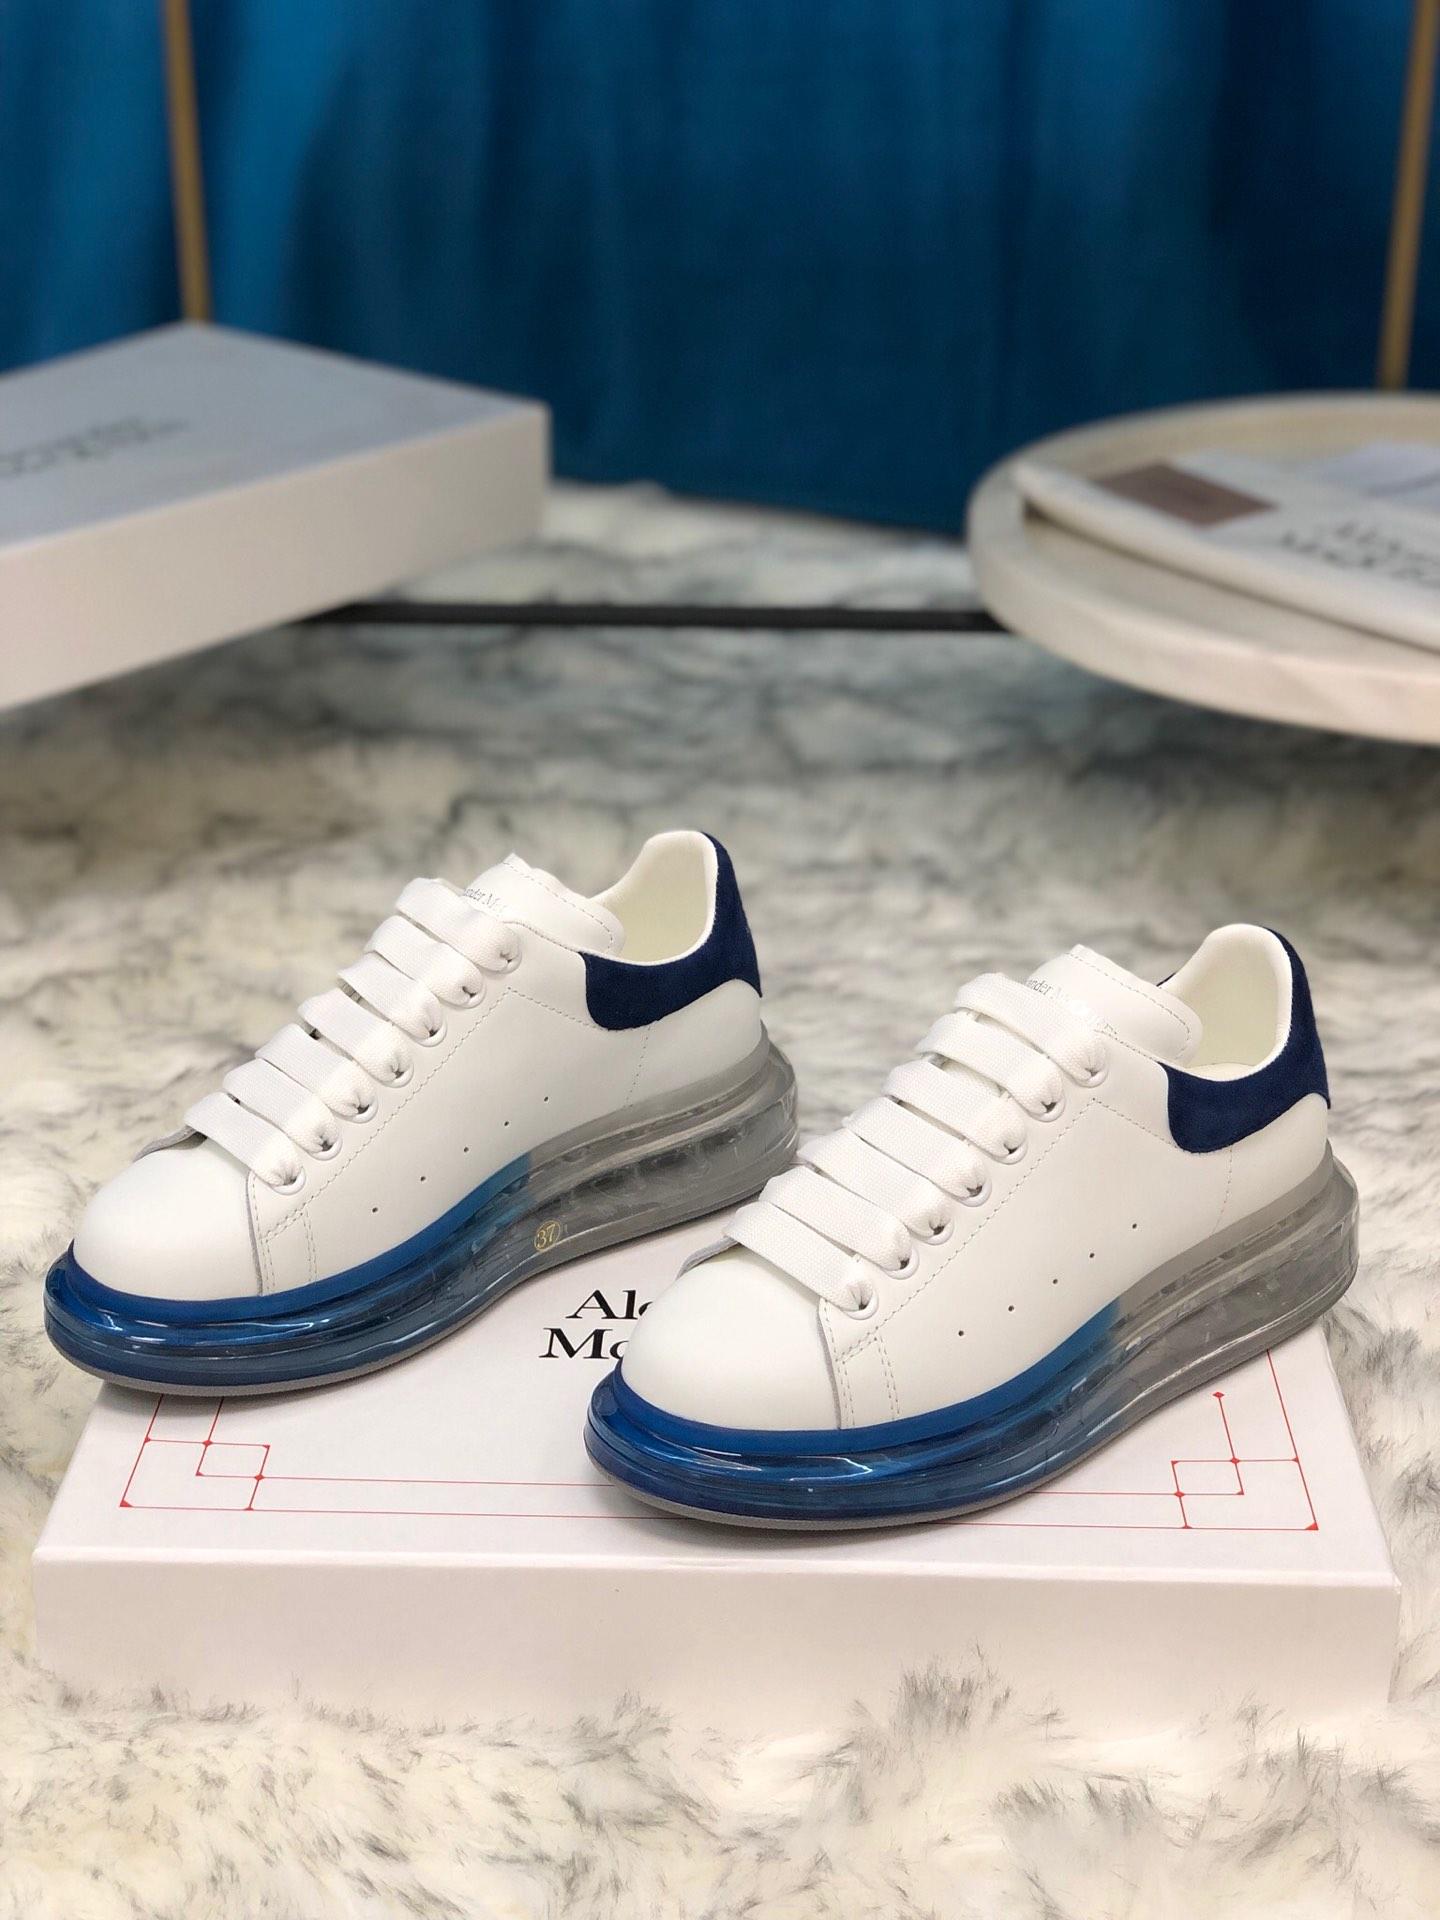 Alexander McQueen Fahion Sneaker White and blue suede heel with transparent sole MS100020